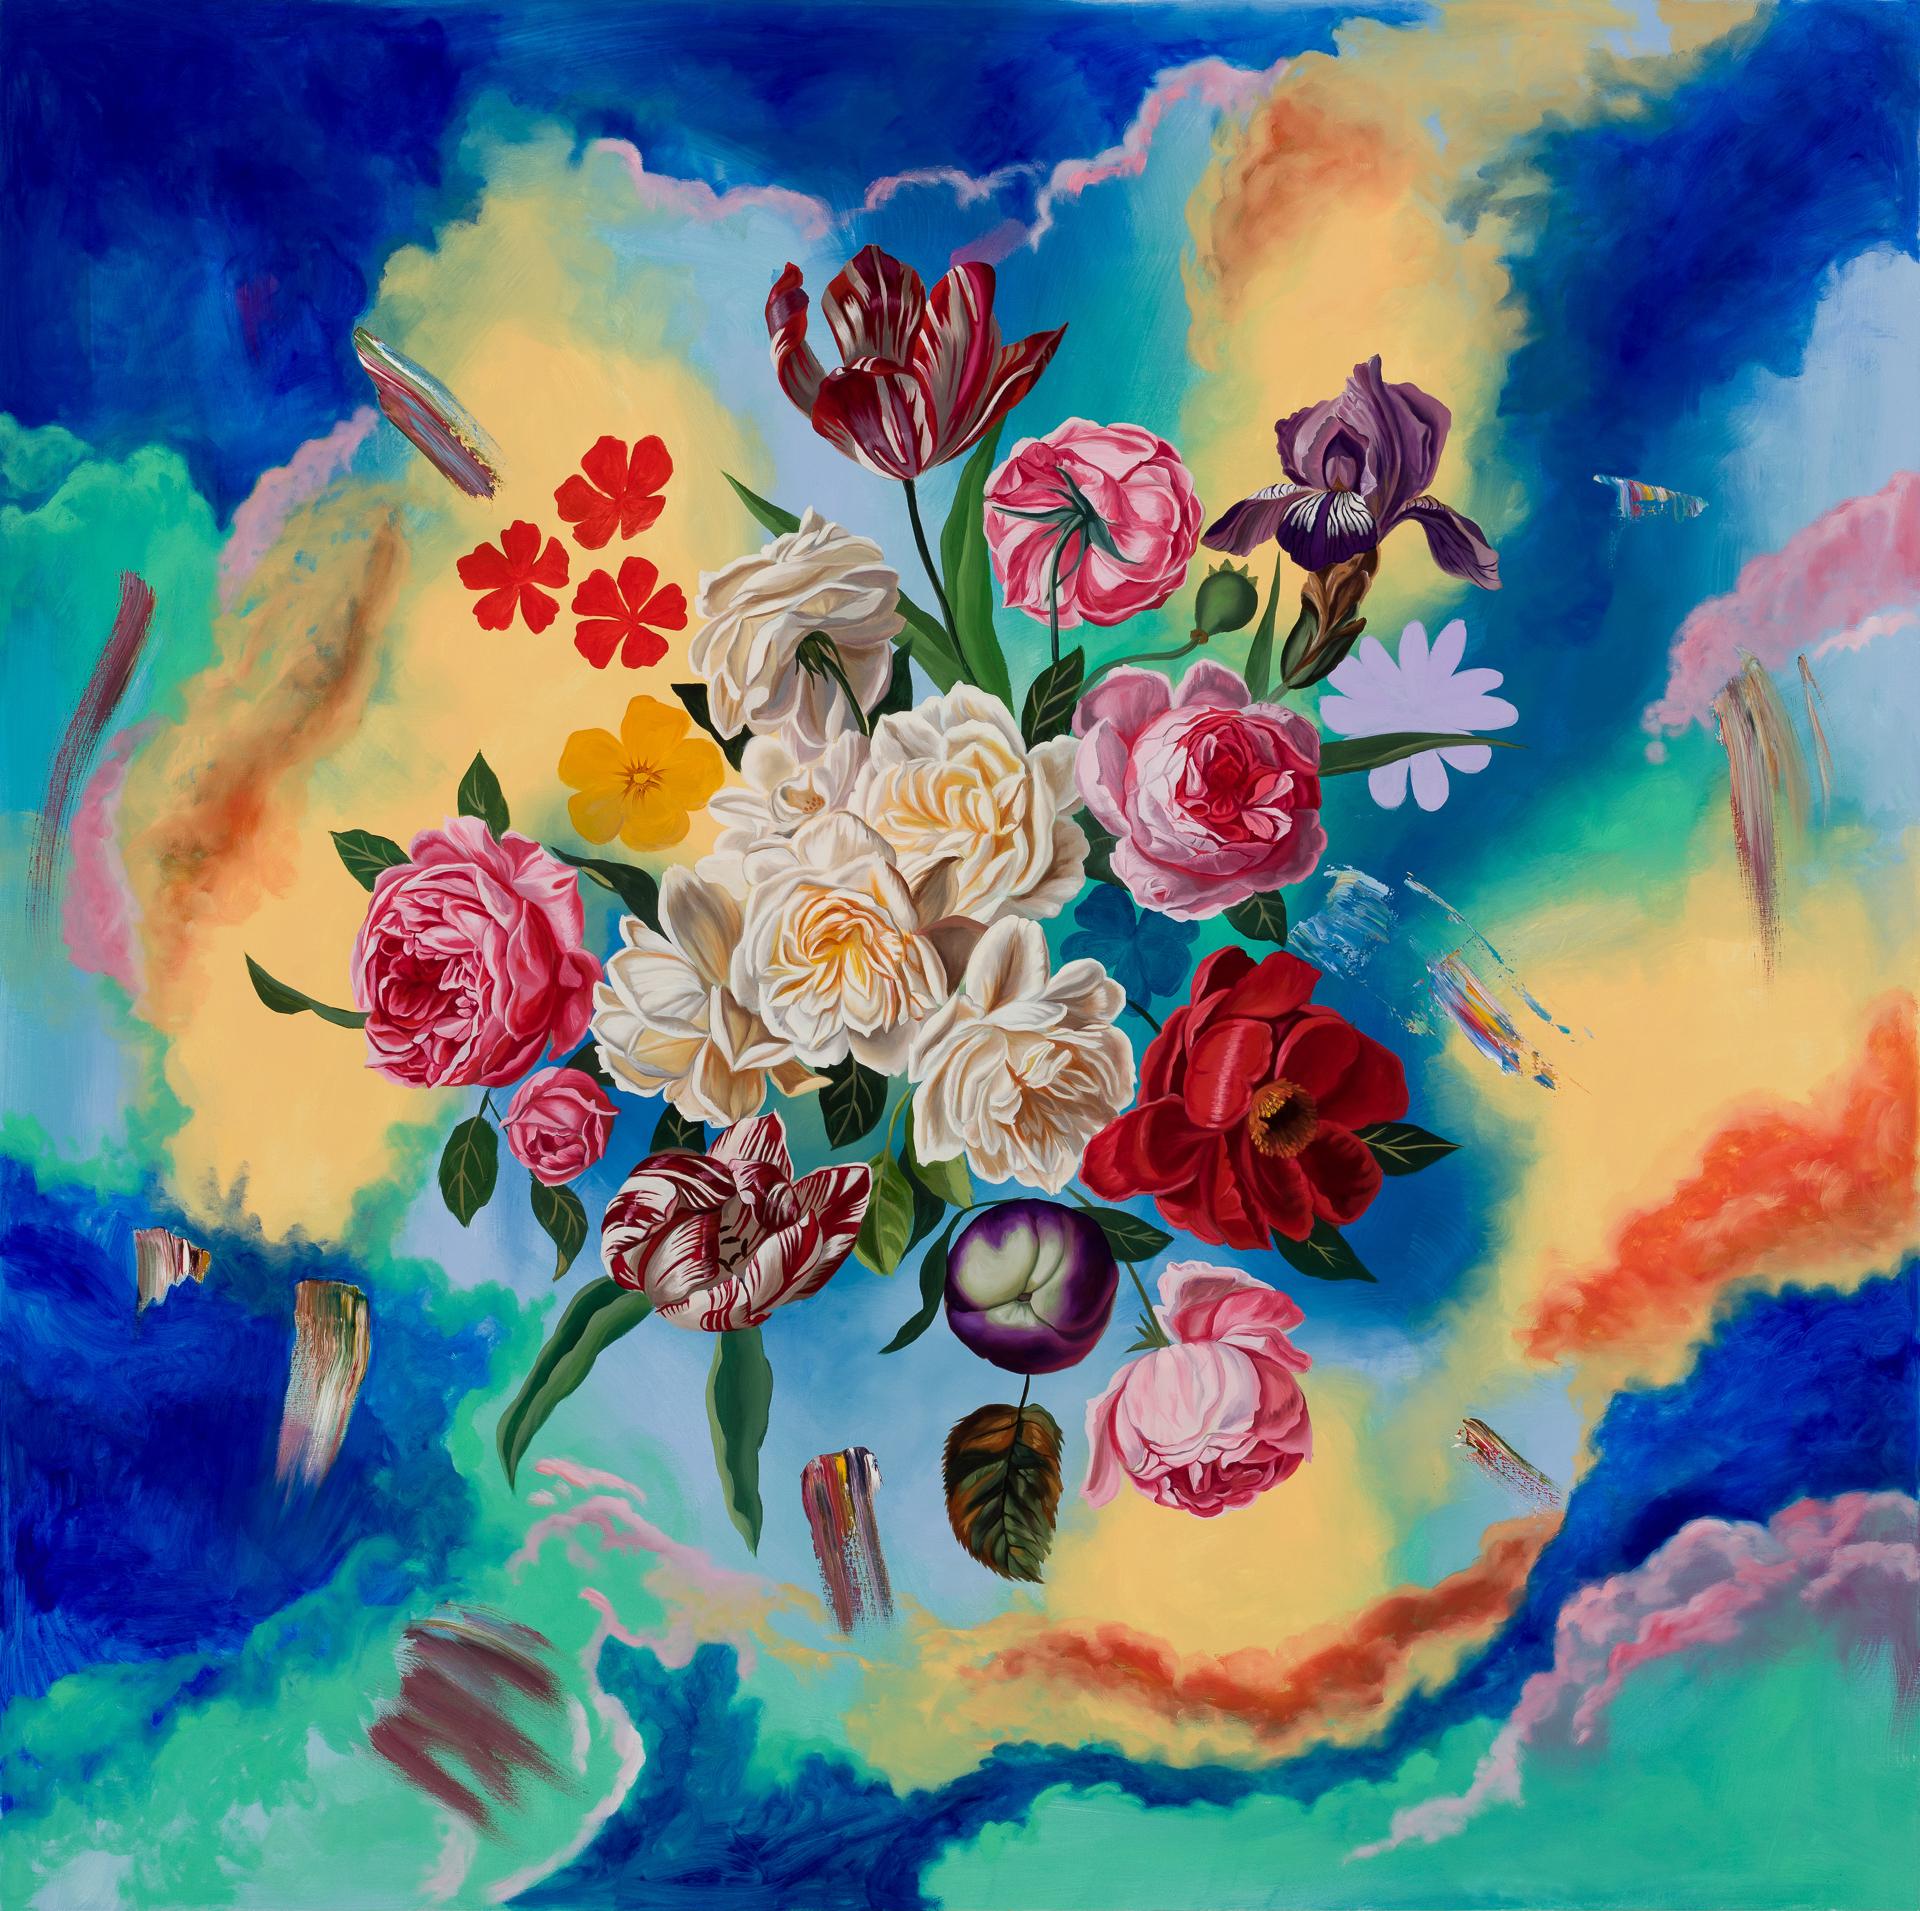 Robin Hextrum Figurative Painting - "Flowers Floating in Chromatic Clouds, " Oil Painting